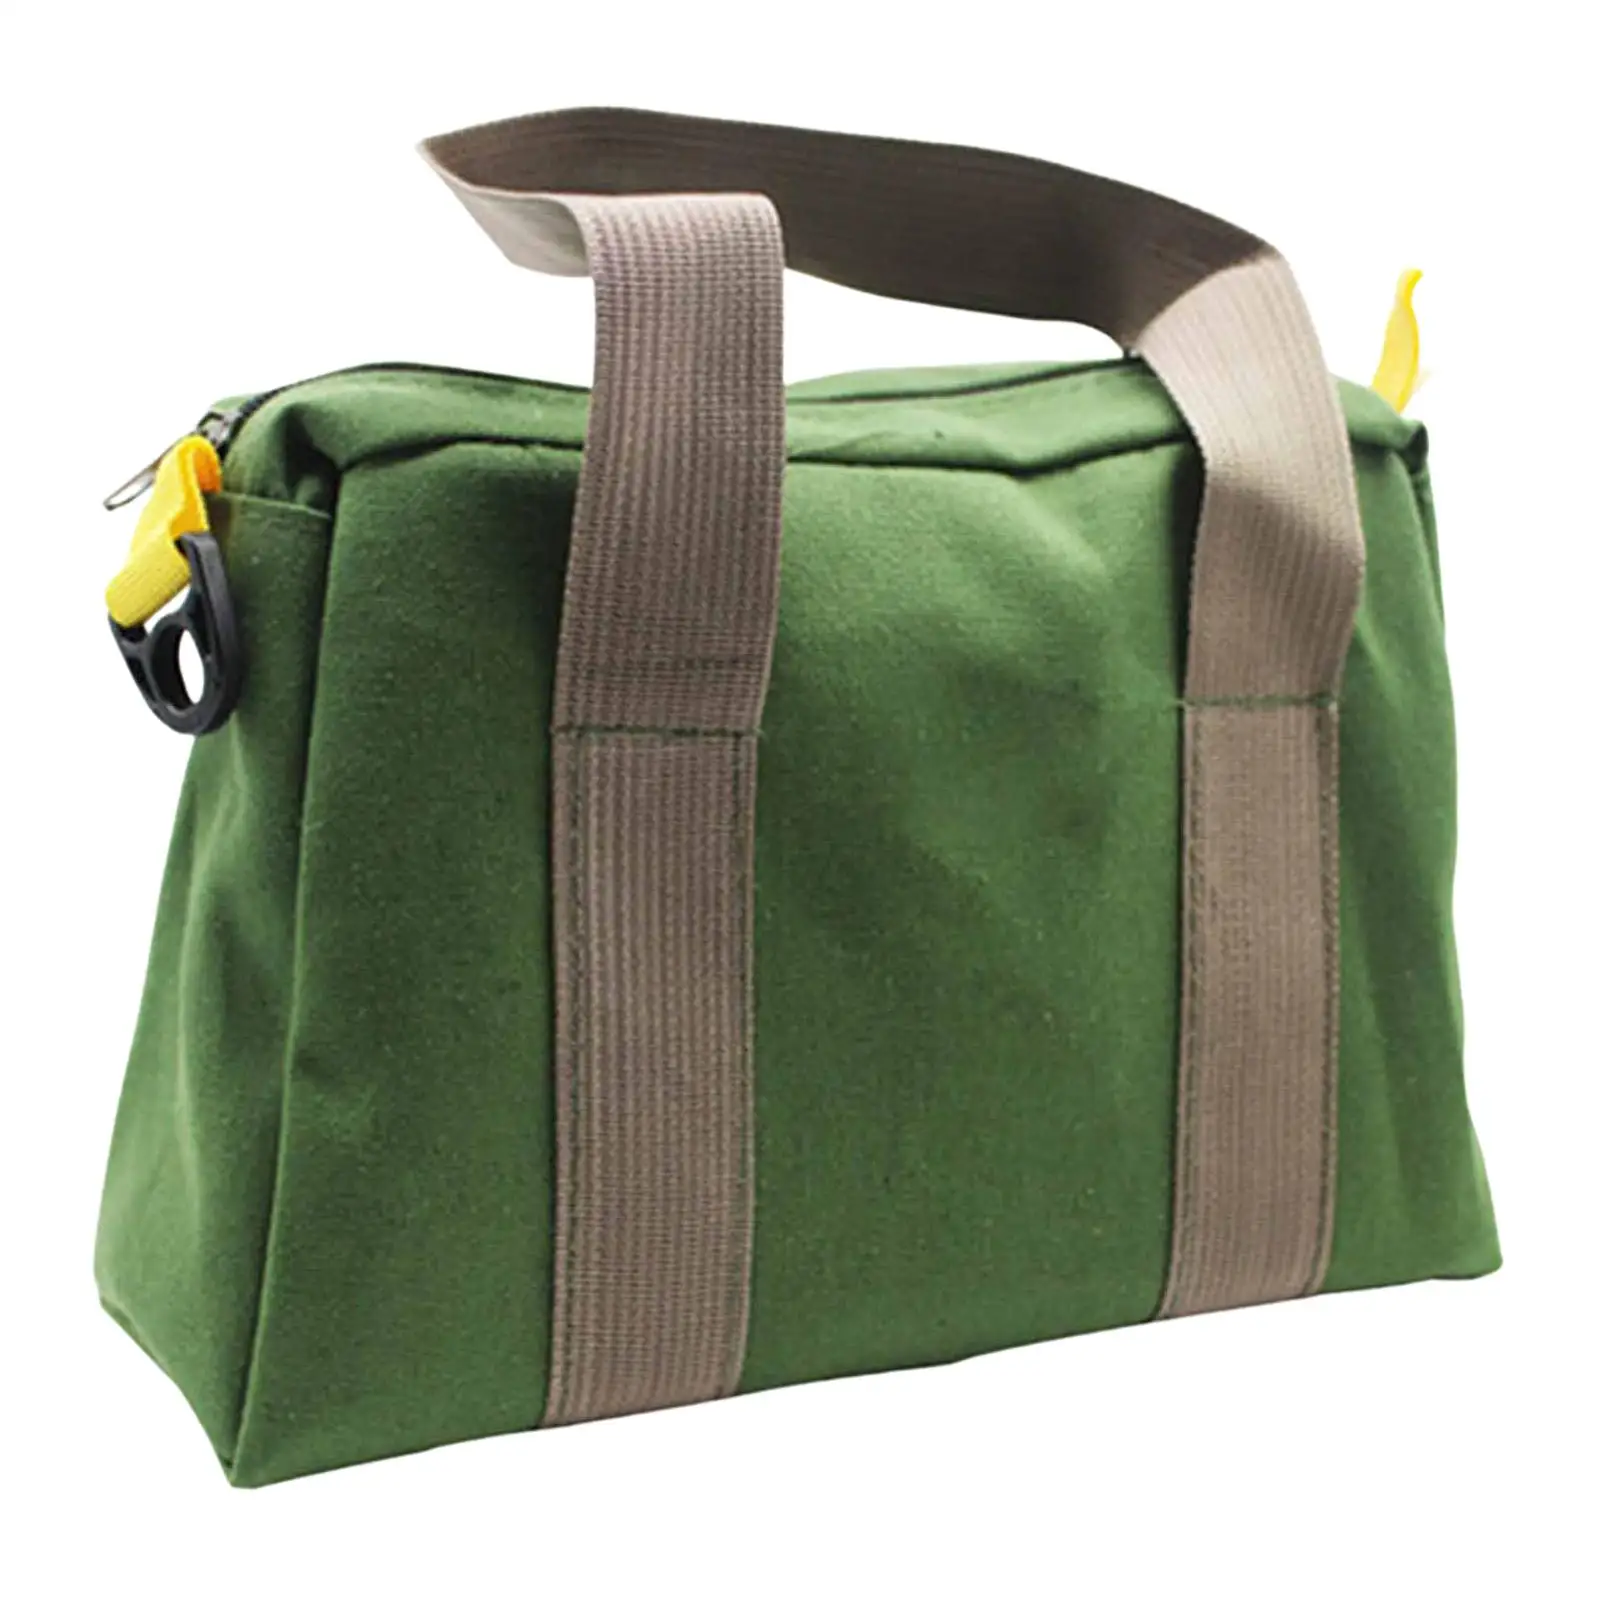 Mechanics Tool Carrying Bag Canvas Work Bag Tool Pouch Heavy Duty Multi Function Wide Mouth